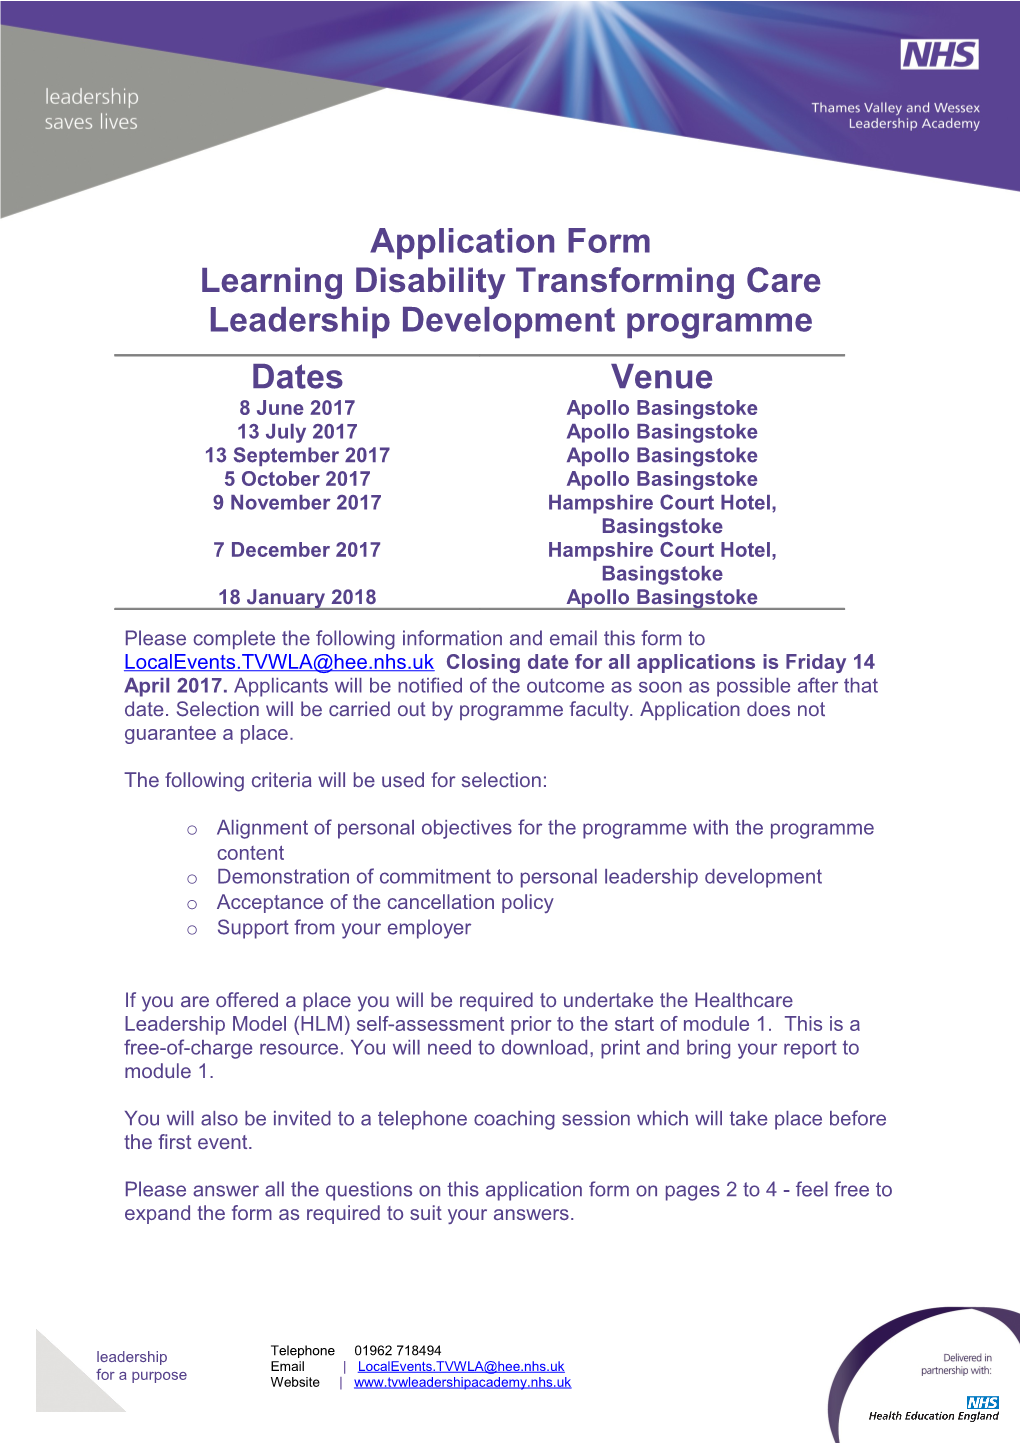 Learning Disability Transforming Care Leadership Development Programme